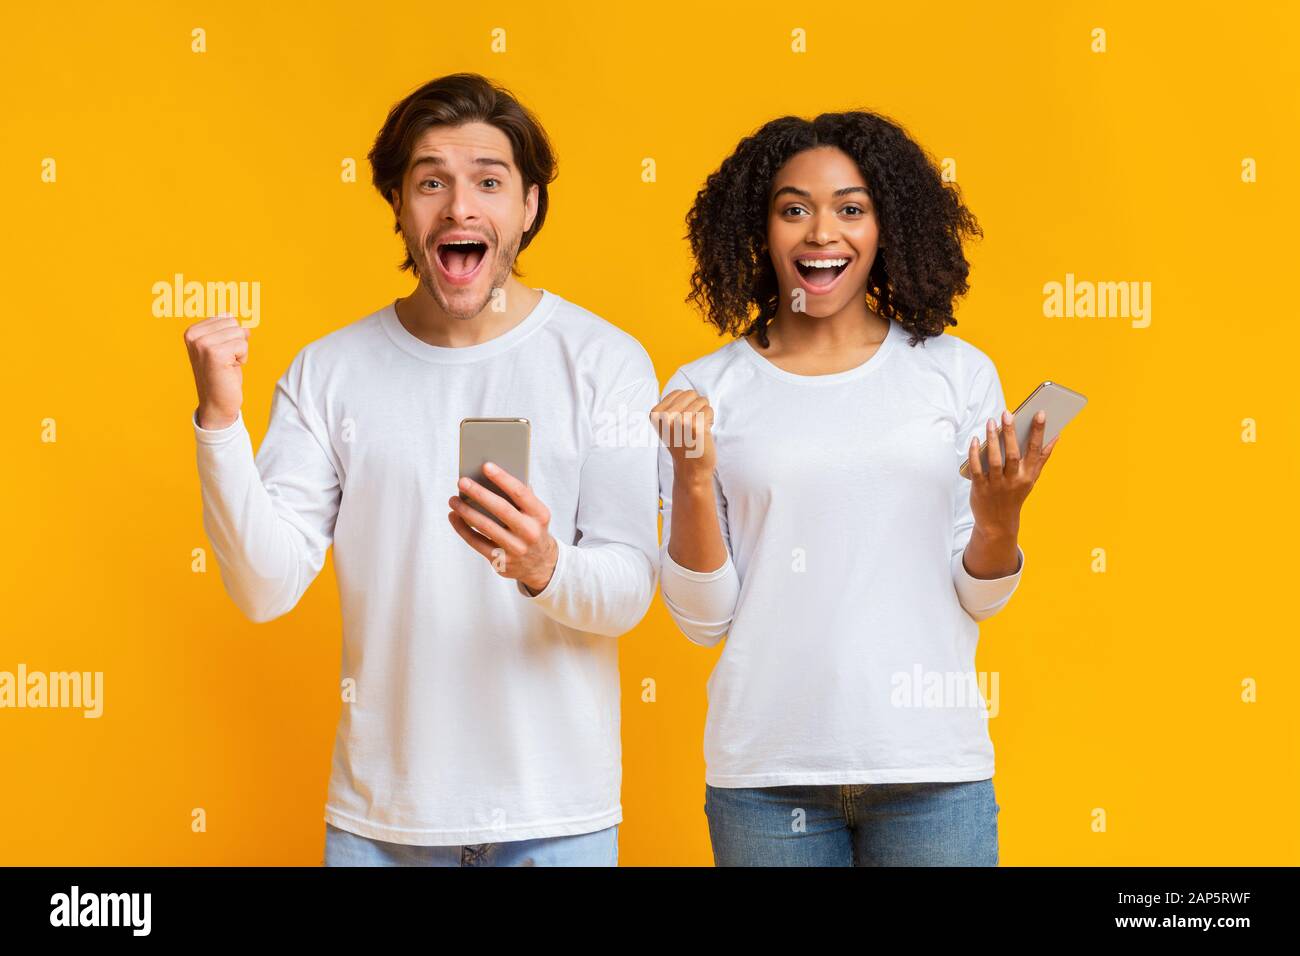 Portrait of overjoyed young man and woman rejoicing success with smartphones Stock Photo